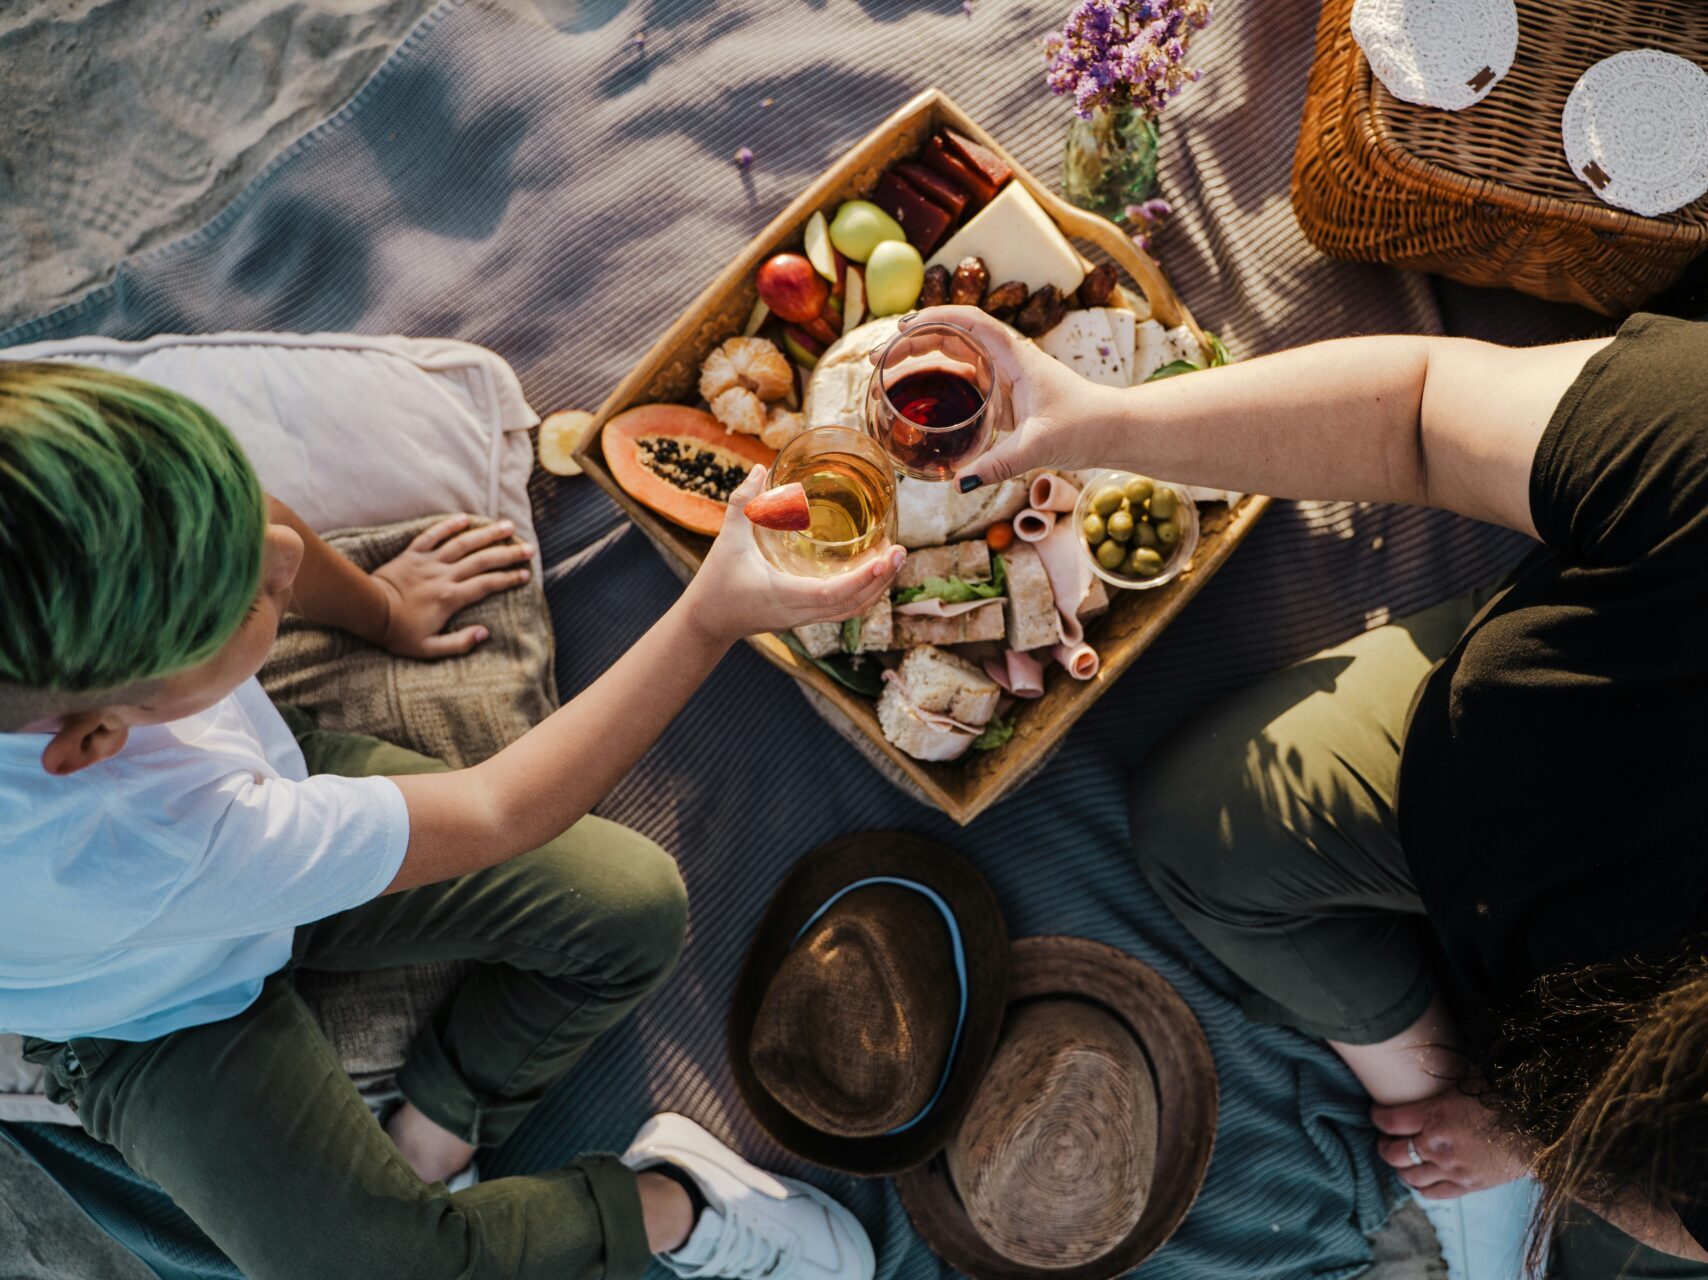 two people toasting glasses over charcuterie board on blanket during picnic